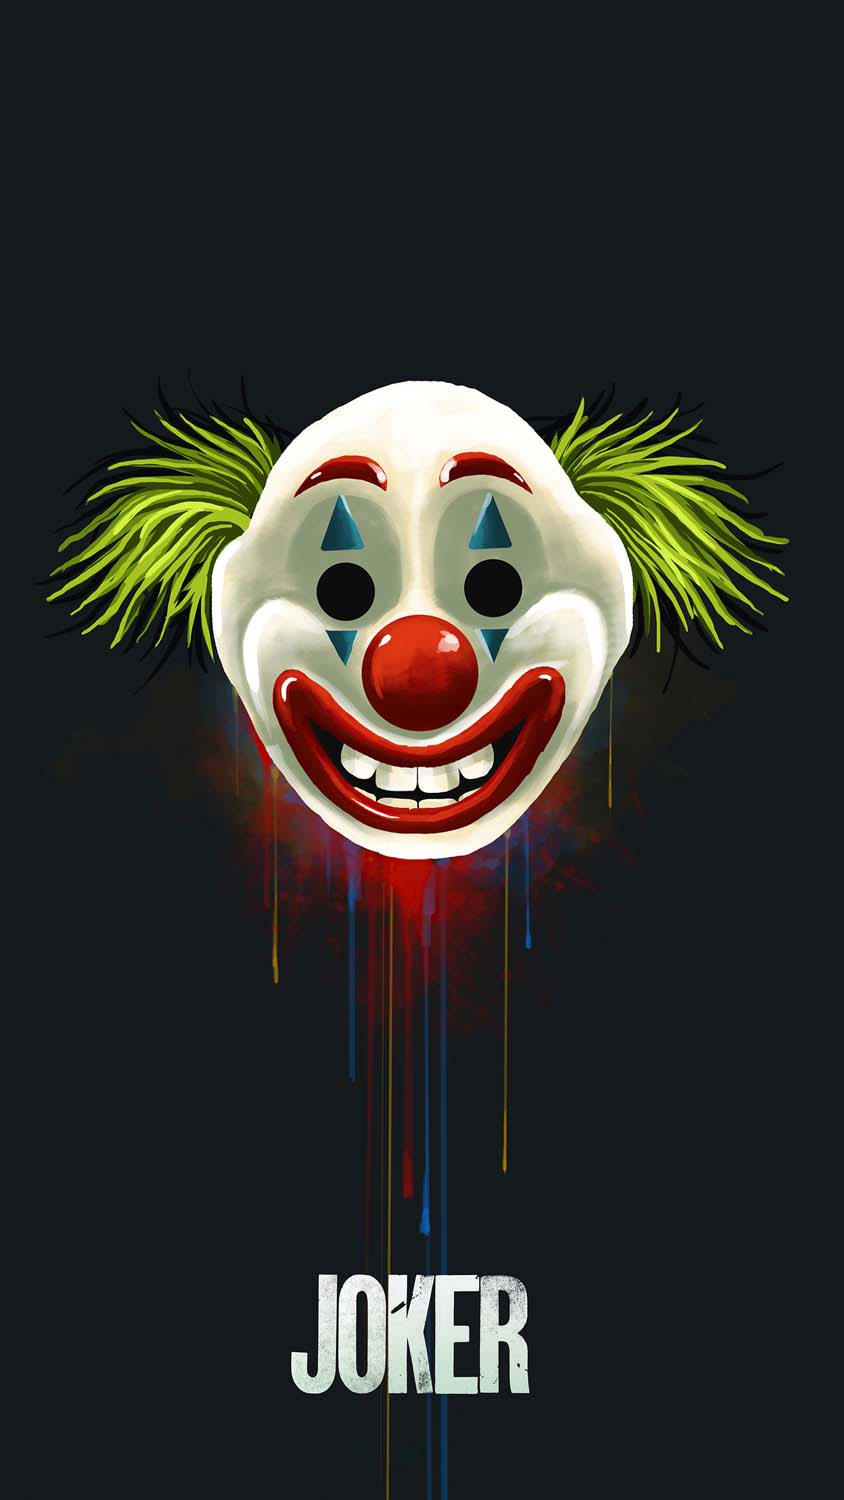 We All Are Clown IPhone Wallpaper HD - IPhone Wallpapers : iPhone Wallpapers